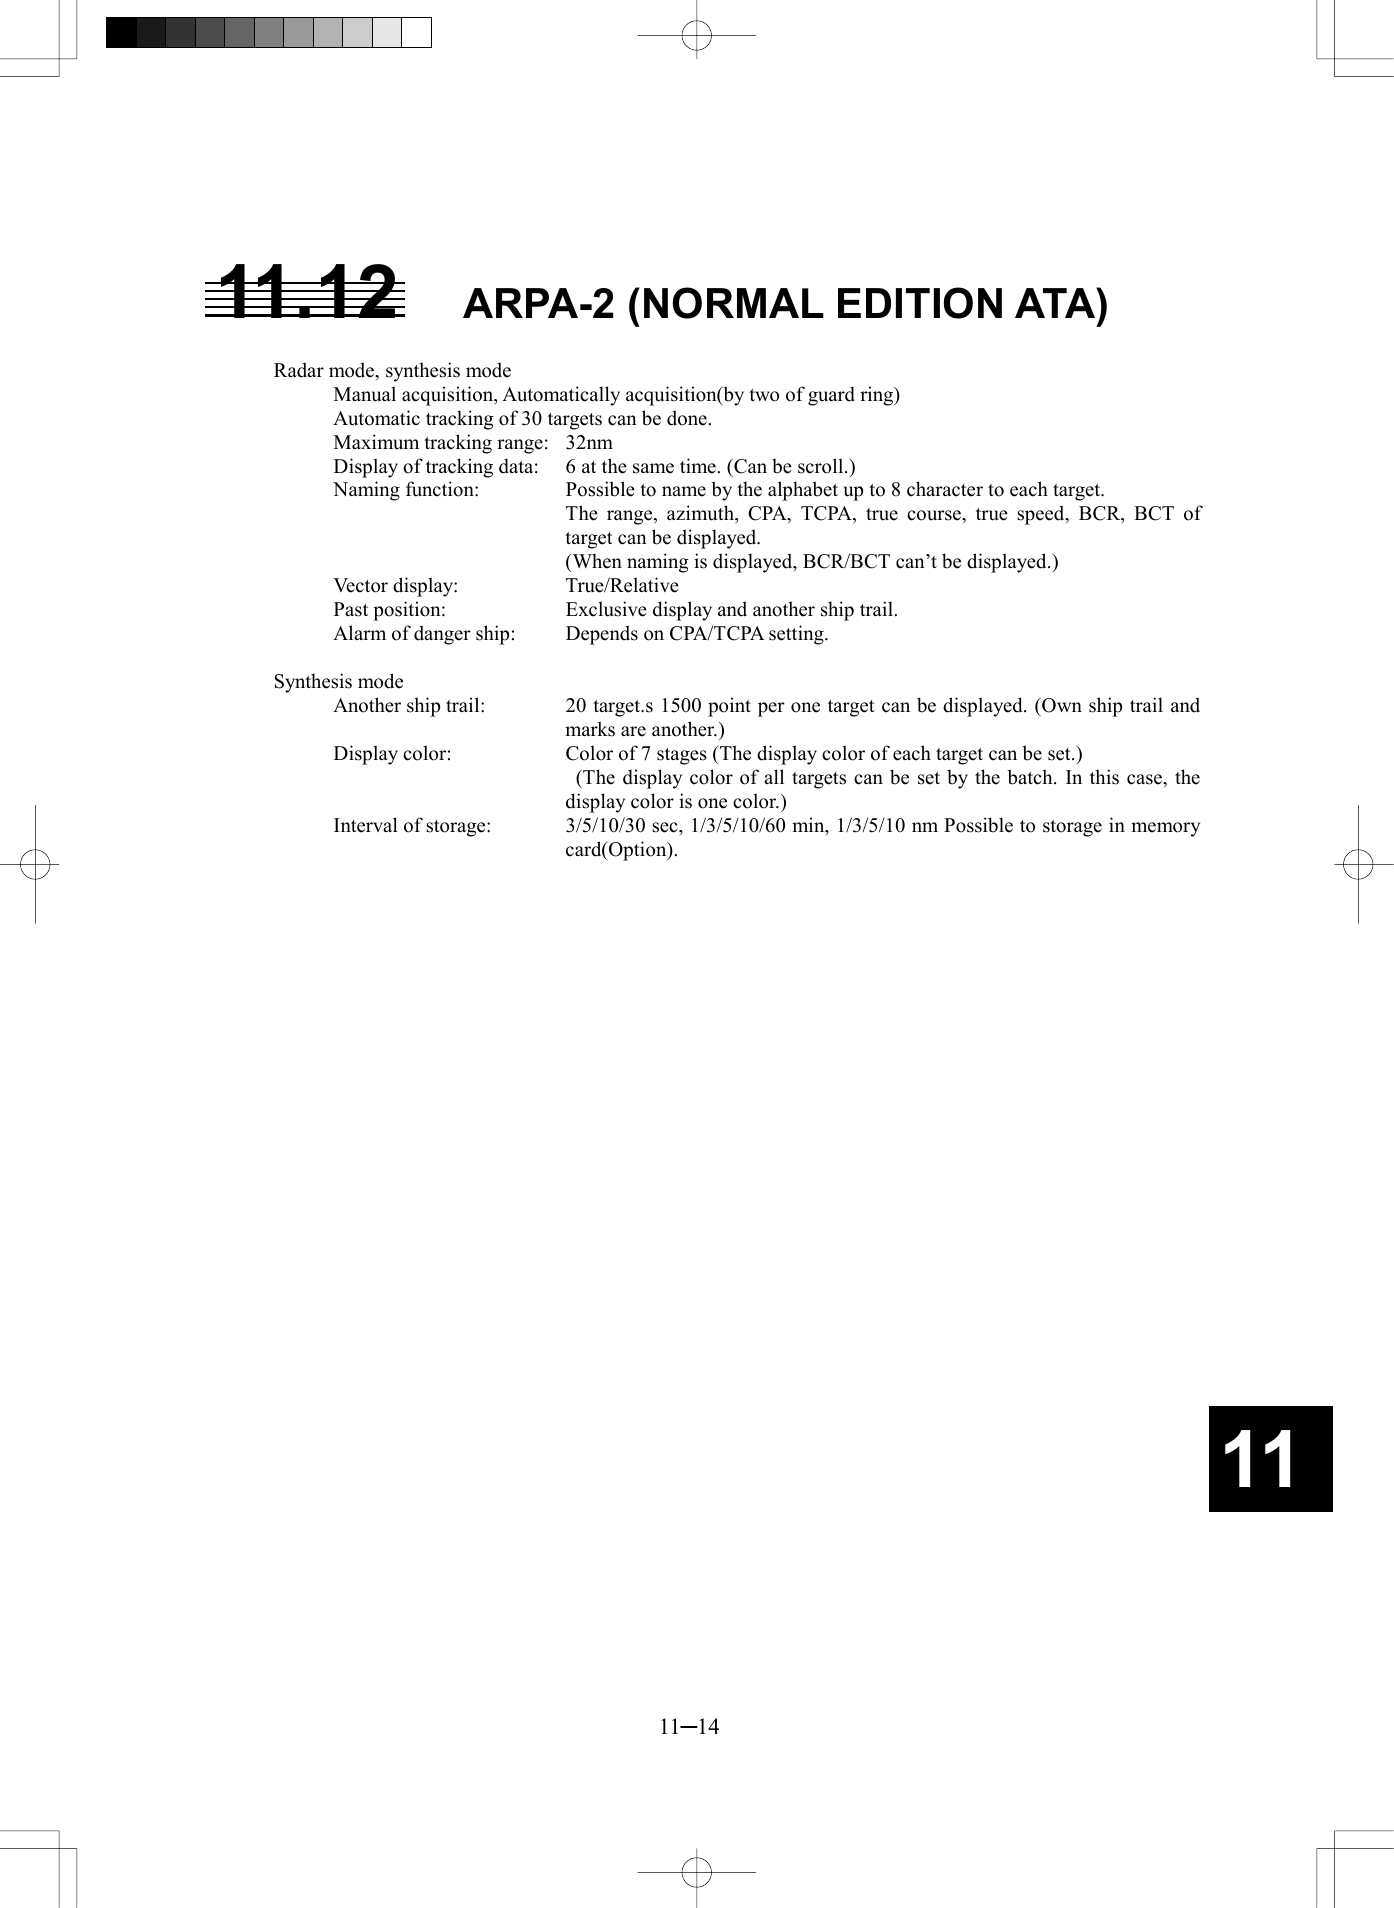   11─14 11 11.12  ARPA-2 (NORMAL EDITION ATA)  Radar mode, synthesis mode Manual acquisition, Automatically acquisition(by two of guard ring) Automatic tracking of 30 targets can be done. Maximum tracking range:  32nm Display of tracking data:  6 at the same time. (Can be scroll.) Naming function:    Possible to name by the alphabet up to 8 character to each target.   The range, azimuth, CPA, TCPA, true course, true speed, BCR, BCT of target can be displayed.     (When naming is displayed, BCR/BCT can’t be displayed.) Vector display:    True/Relative Past position:    Exclusive display and another ship trail. Alarm of danger ship:    Depends on CPA/TCPA setting.  Synthesis mode Another ship trail:    20 target.s 1500 point per one target can be displayed. (Own ship trail and marks are another.) Display color:    Color of 7 stages (The display color of each target can be set.)     (The display color of all targets can be set by the batch. In this case, the display color is one color.) Interval of storage:    3/5/10/30 sec, 1/3/5/10/60 min, 1/3/5/10 nm Possible to storage in memory card(Option).     